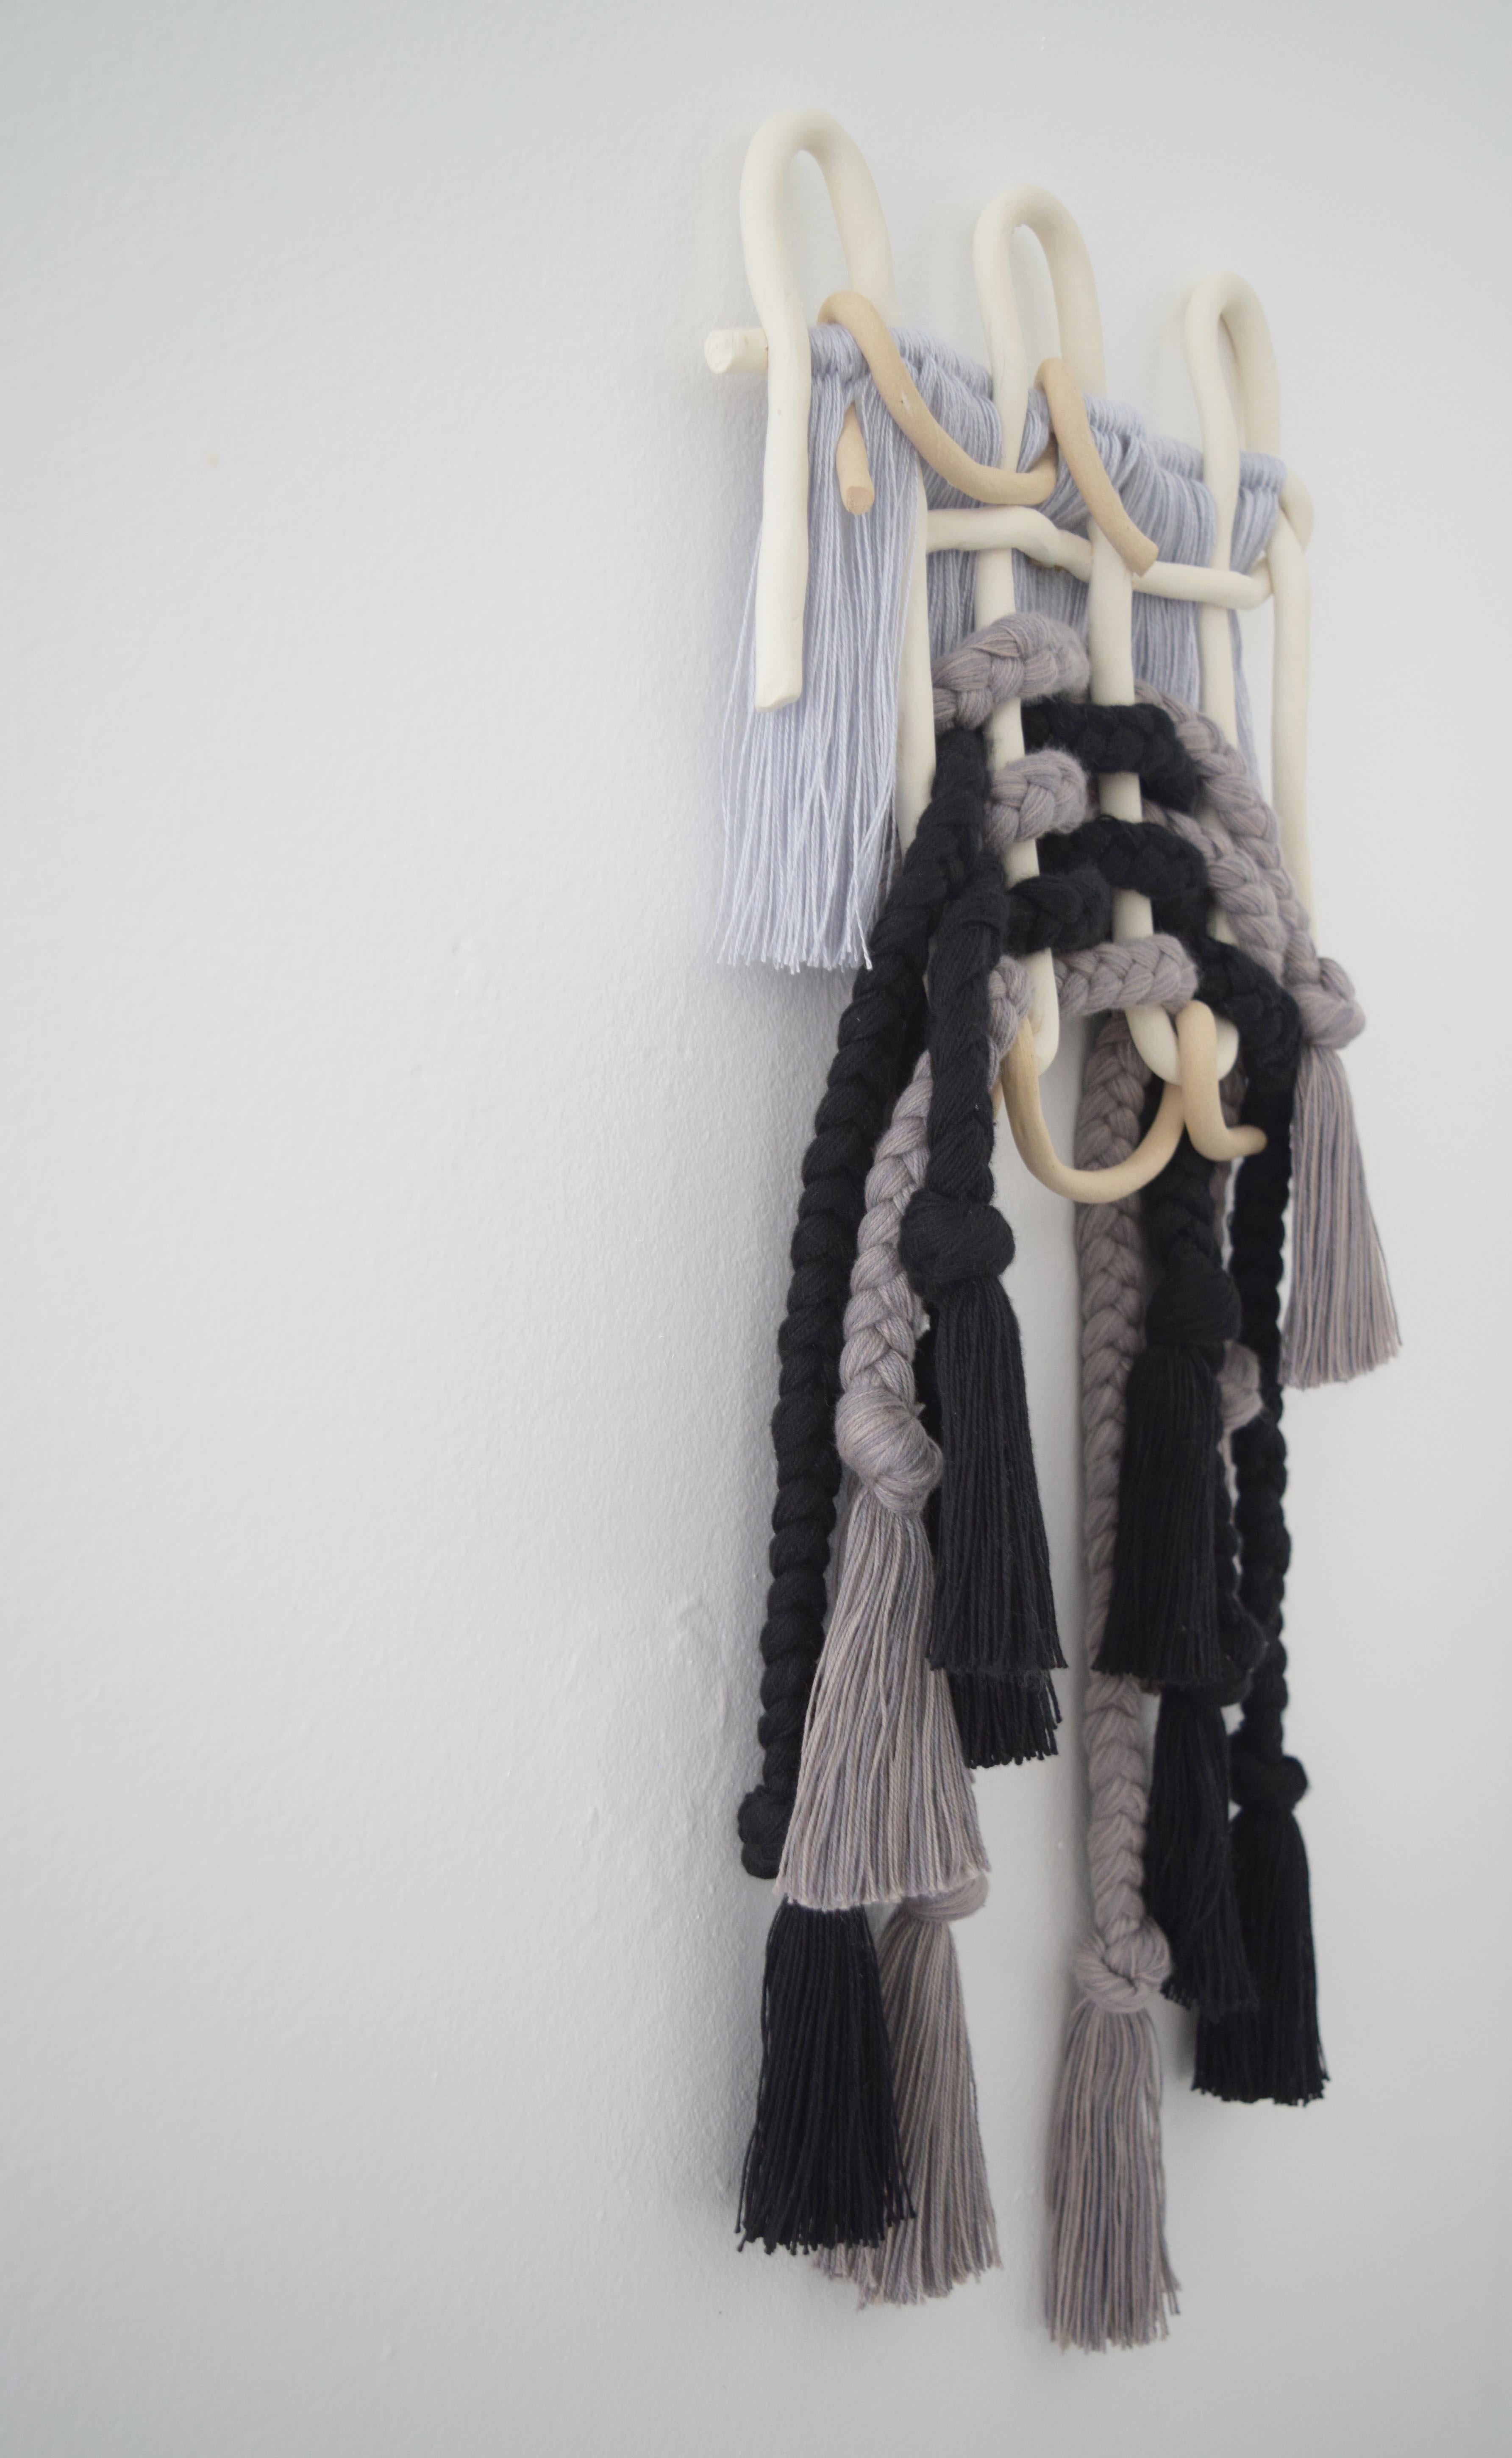 One of a kind wall sculpture #628 By Karen Gayle Tinney

One of a Kind wall sculpture in mixed materials of ceramic and braided cotton/tencel fibers. A woven ceramic panel is intertwined with braids of cotton and tencel in black and tonal grays.